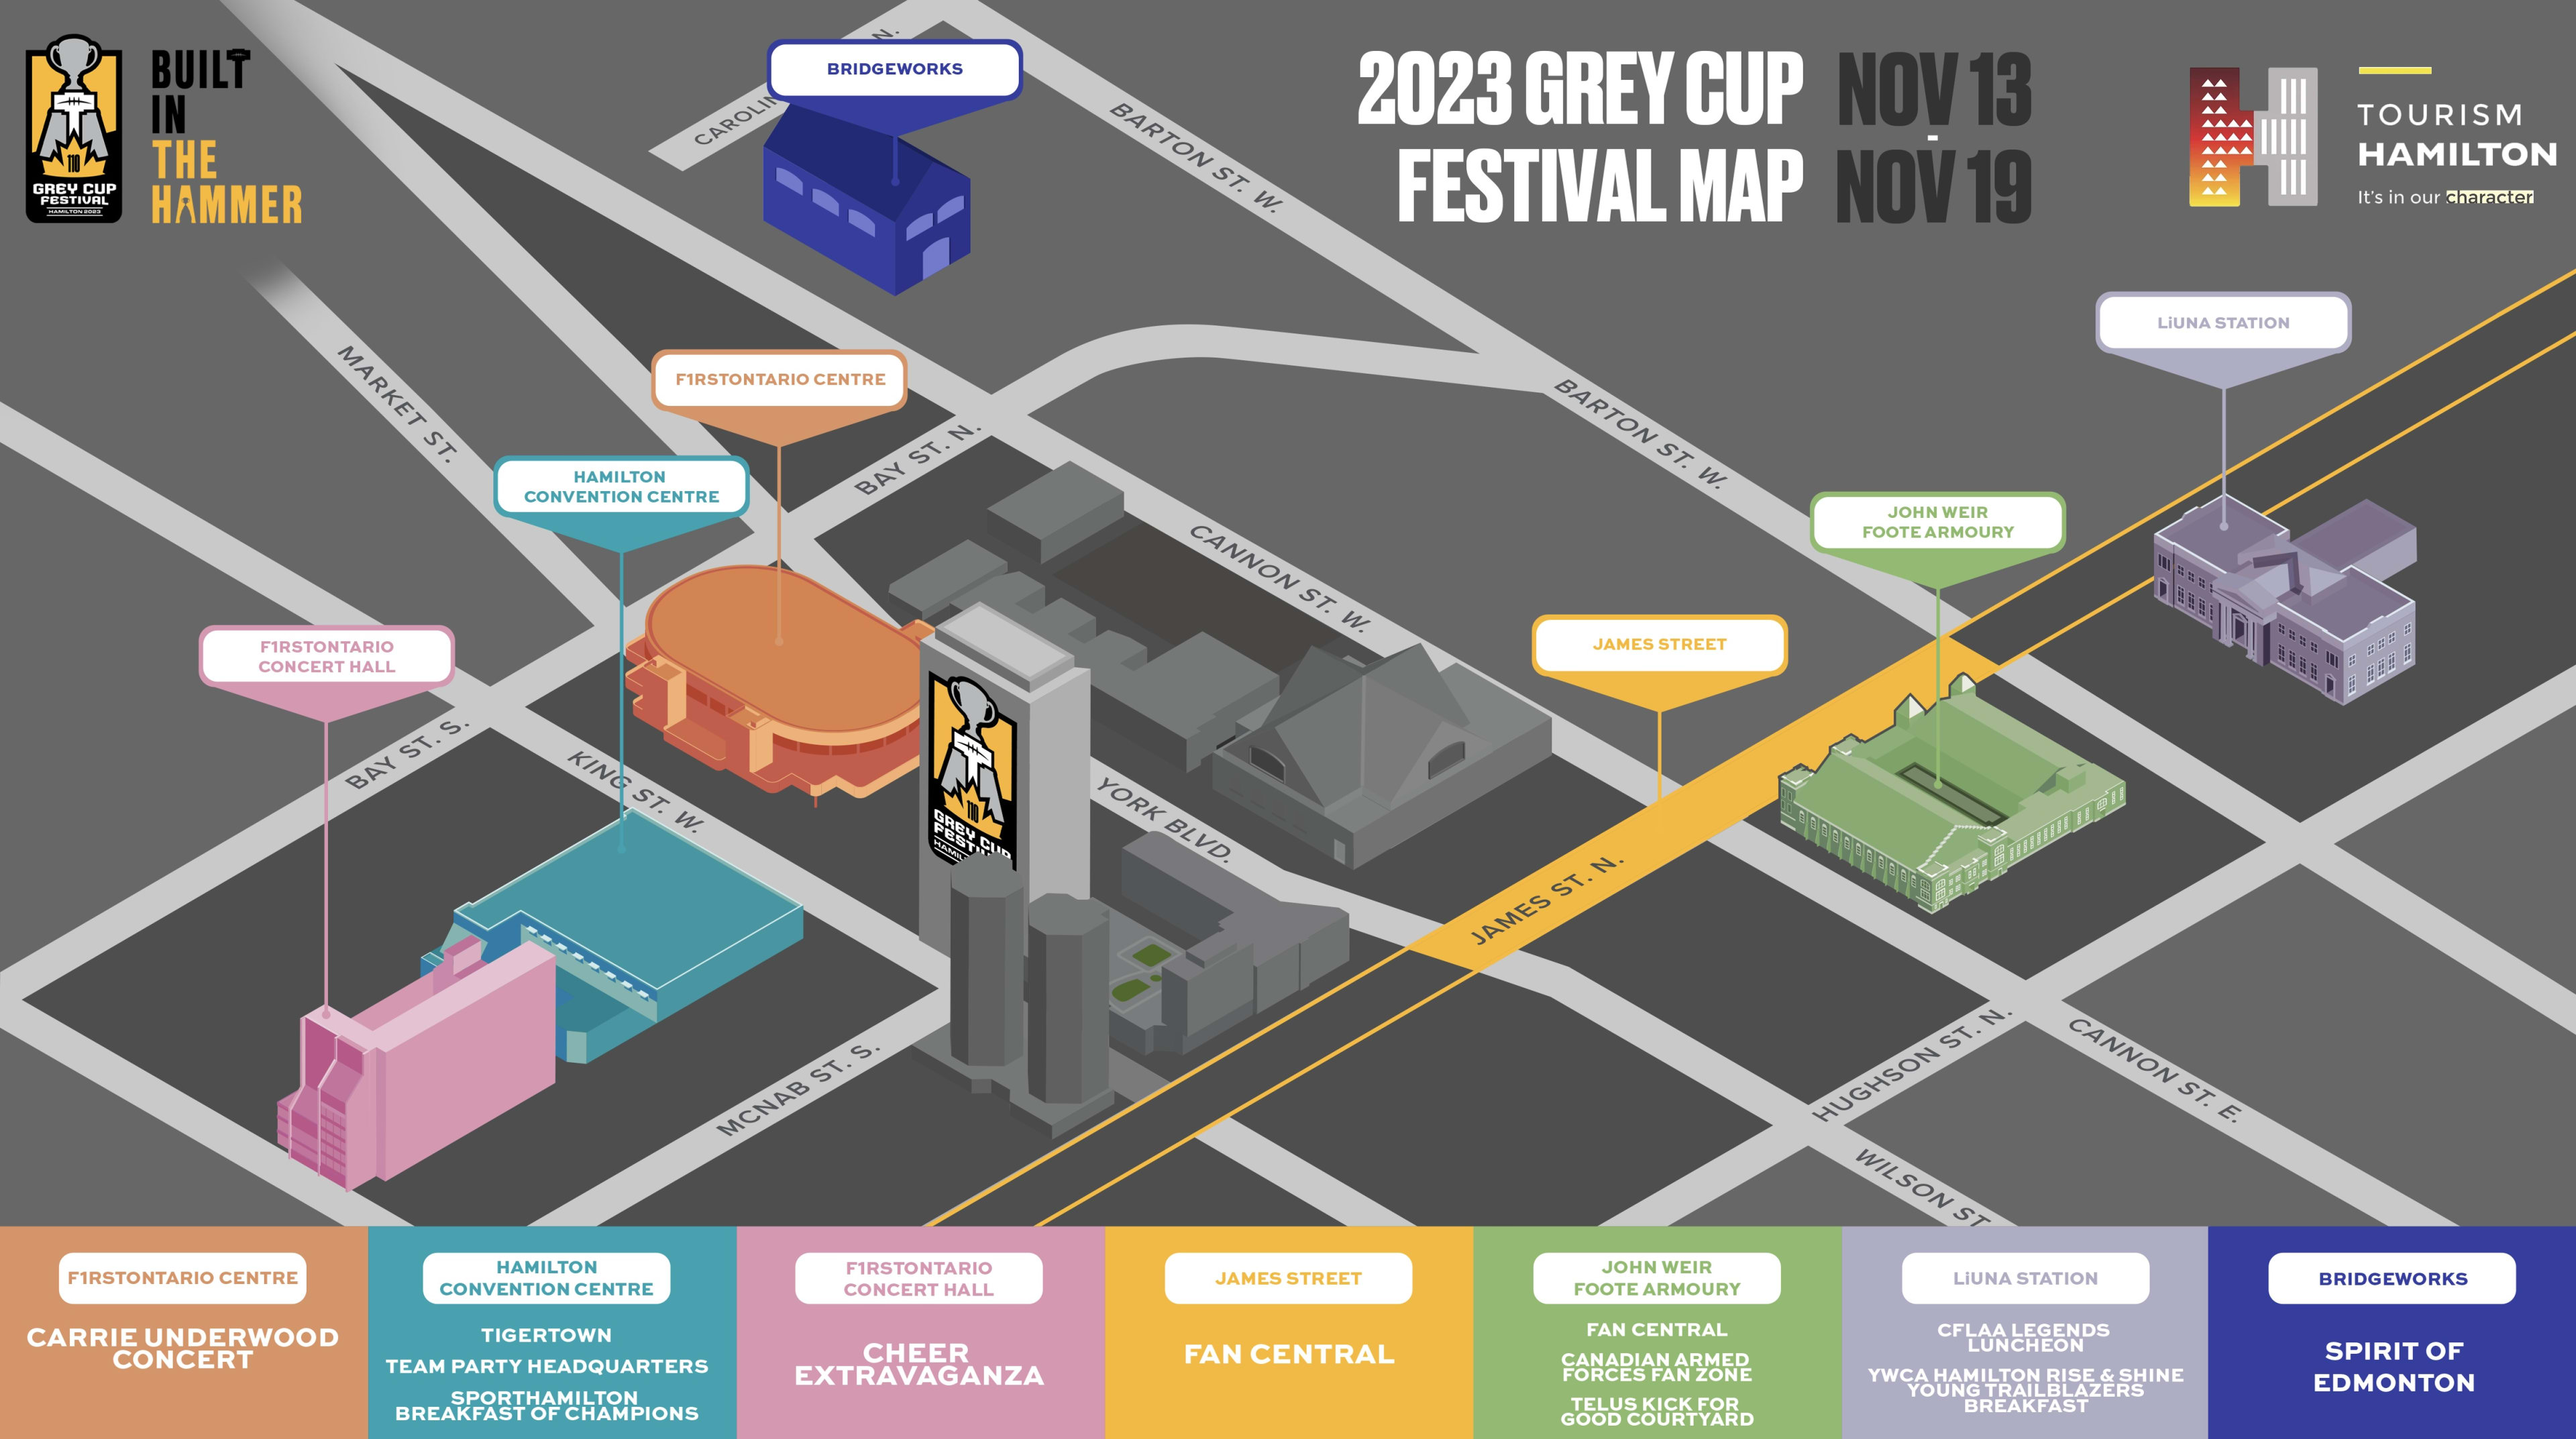 GO to the 2023 Grey Cup Festival